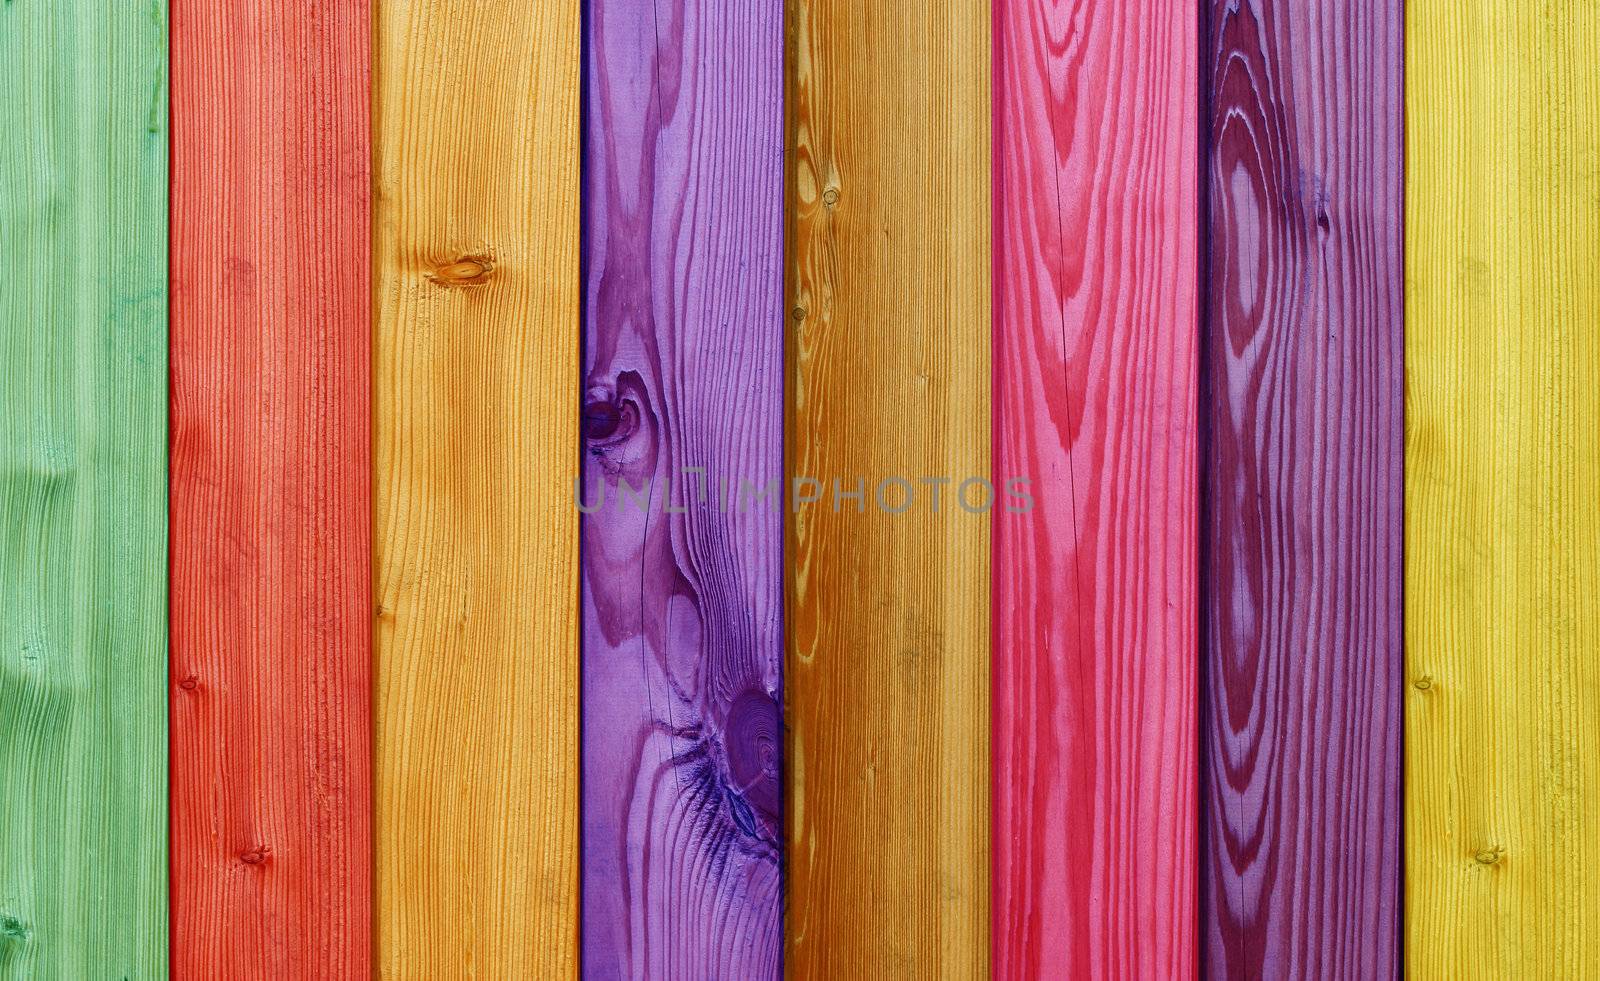 different wood grains by photochecker